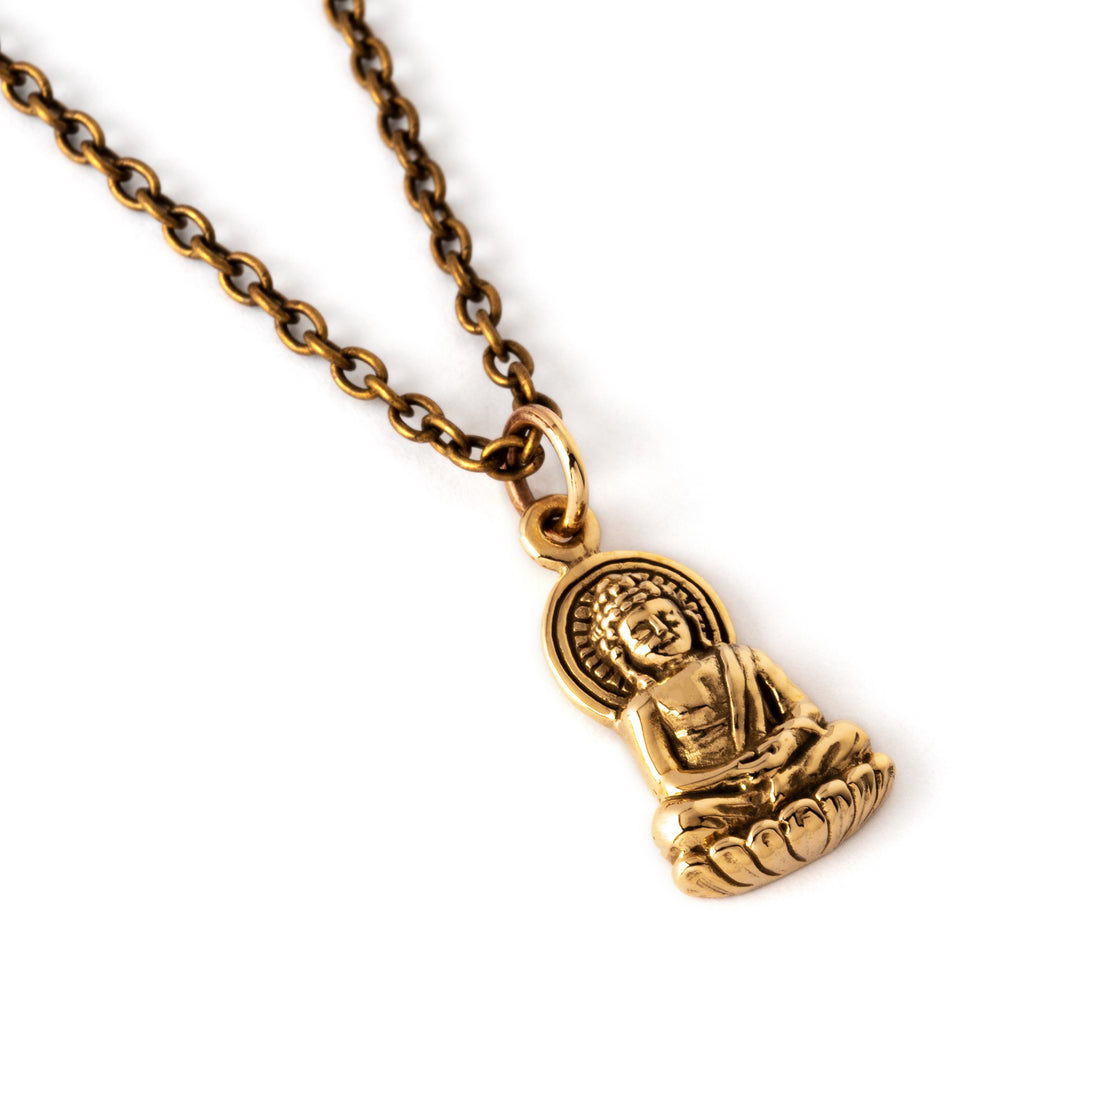 tiny bronze Buddha pendant on a bronze chain necklace side view